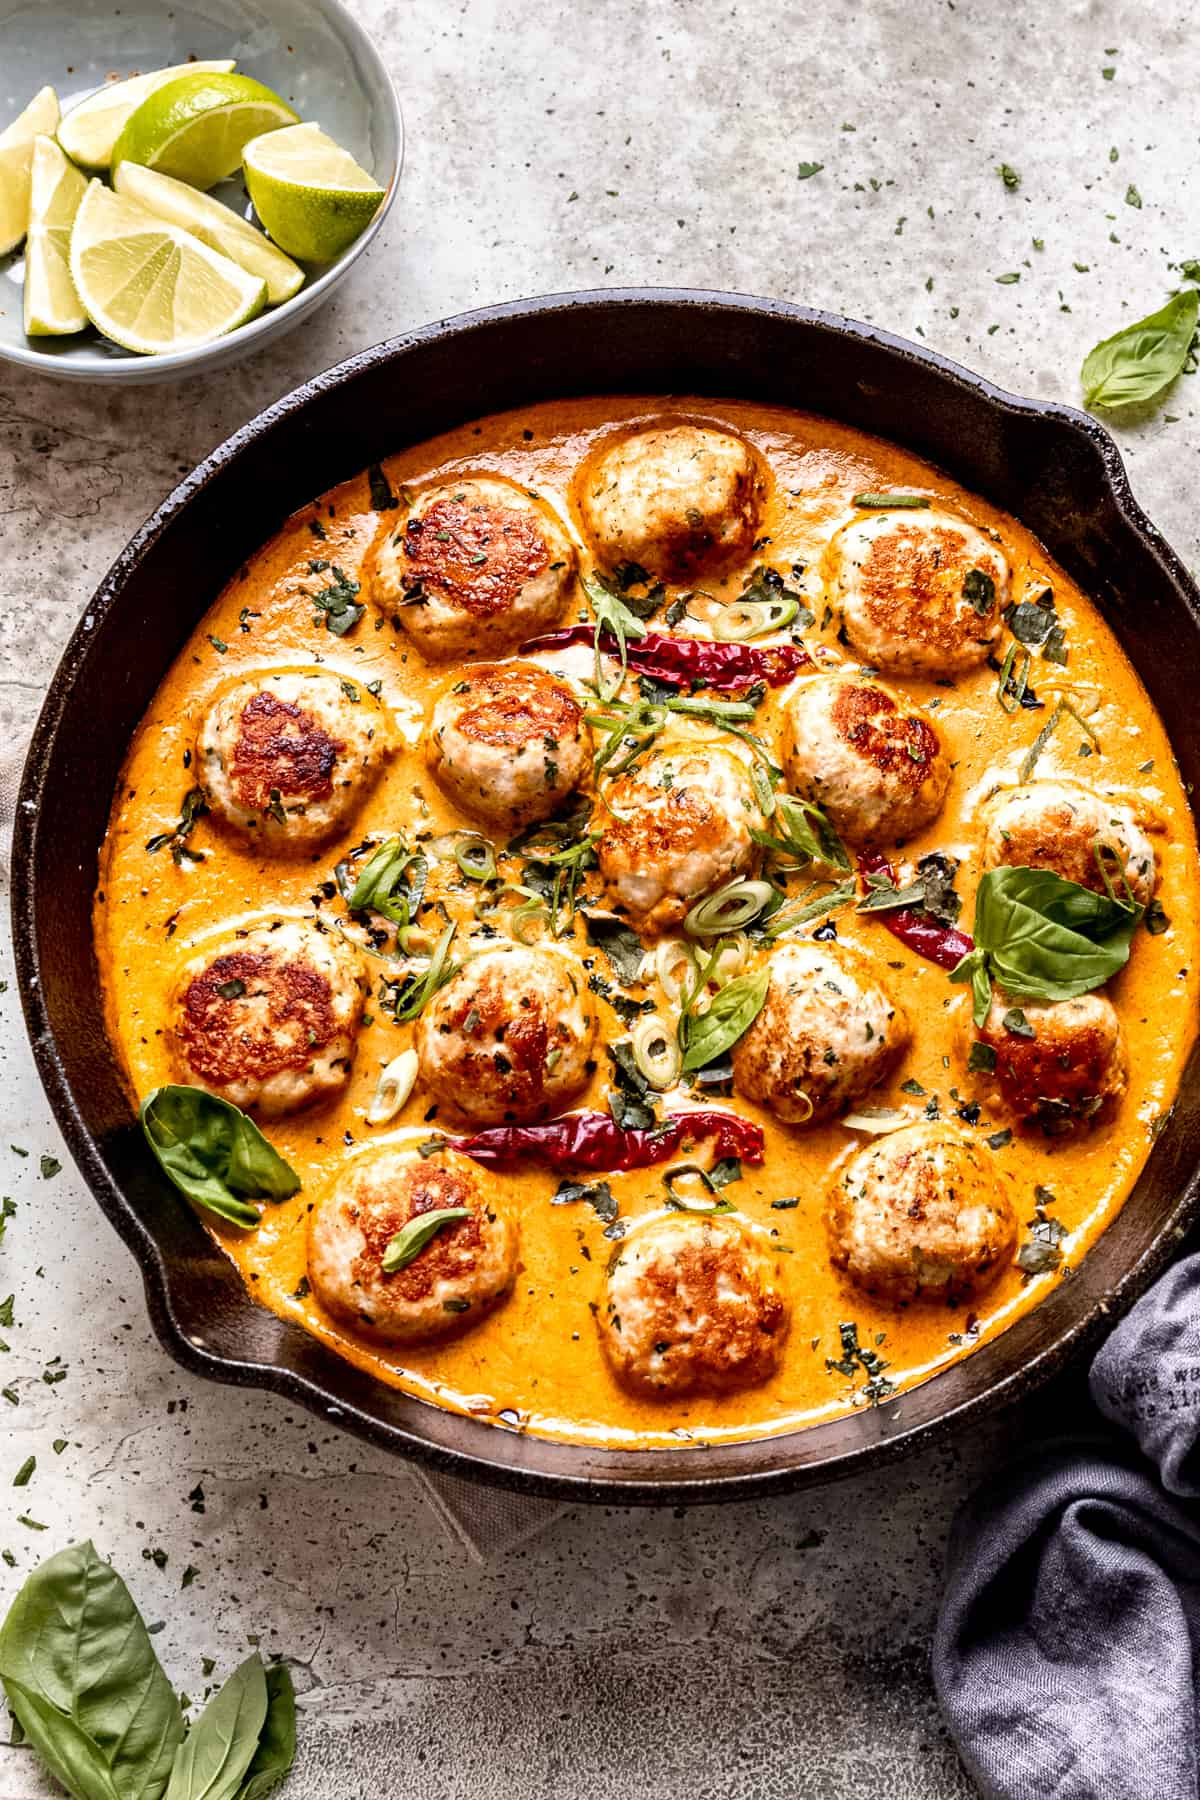 Turkey meatballs in Thai red curry sauce.